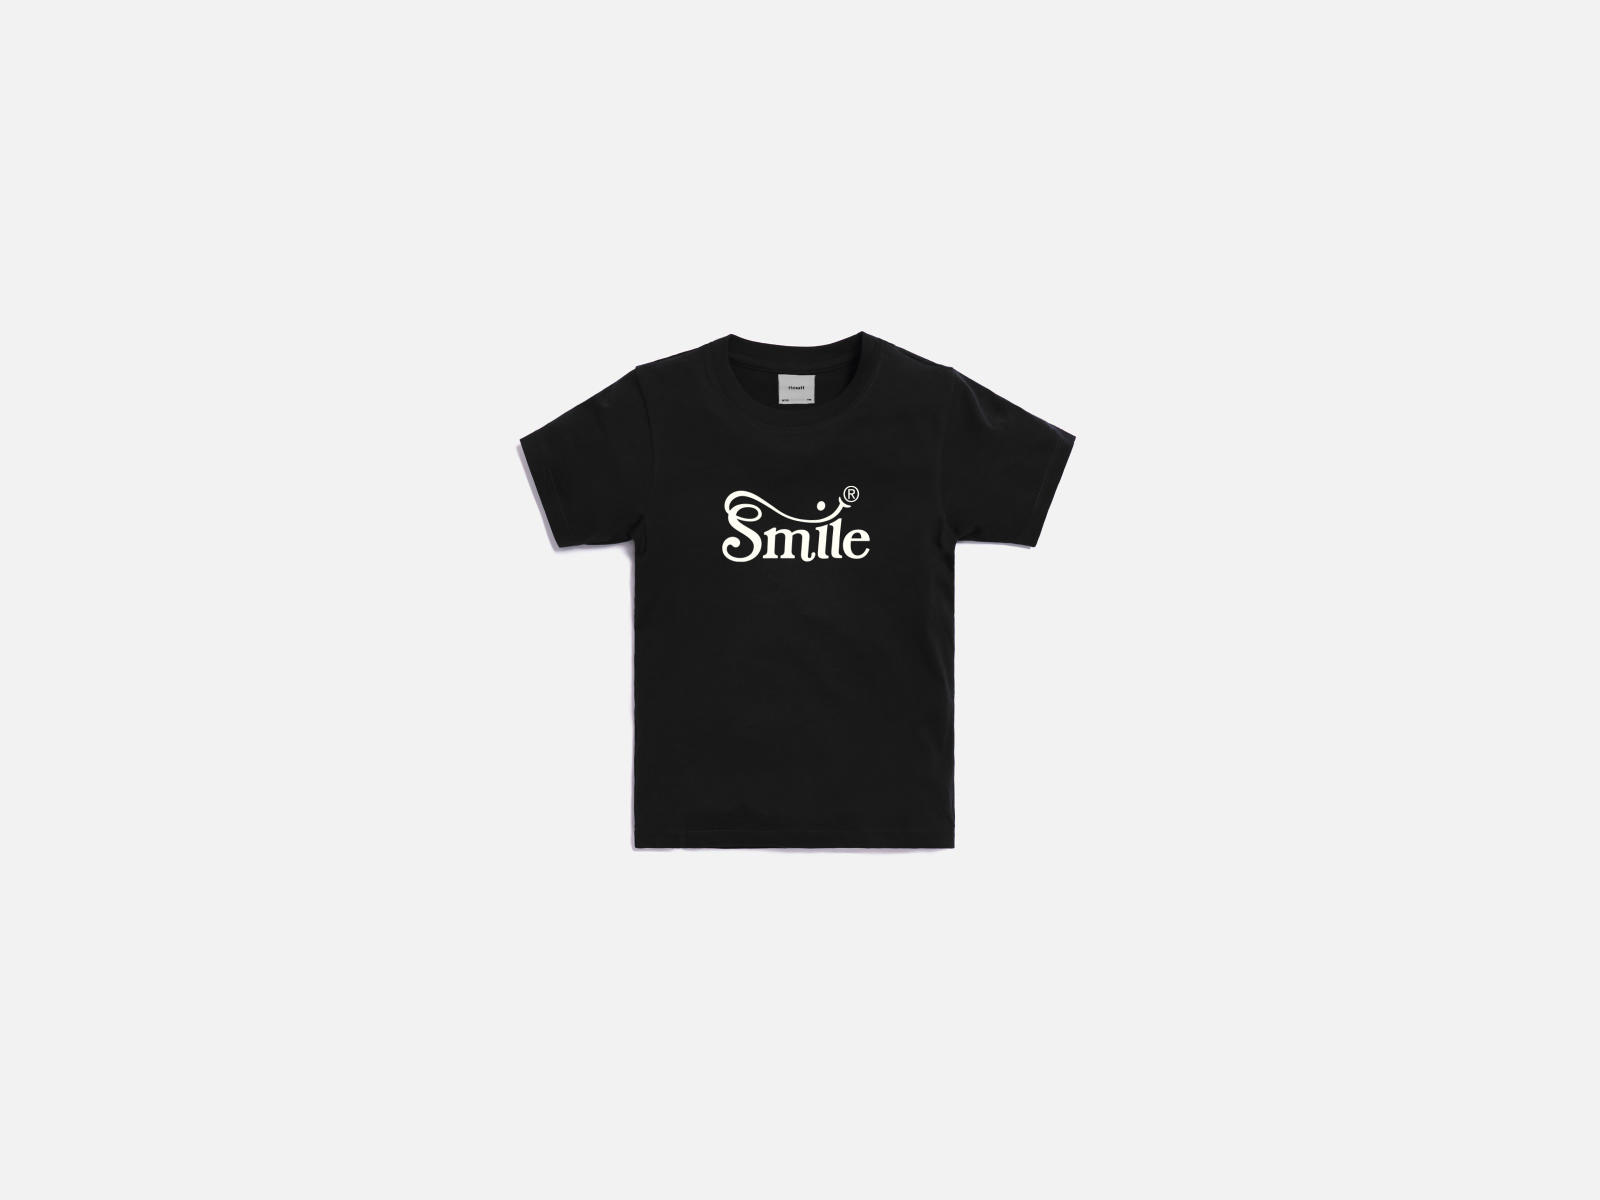 Have a Smile® Tee for Kids with Smile logo printed on the front